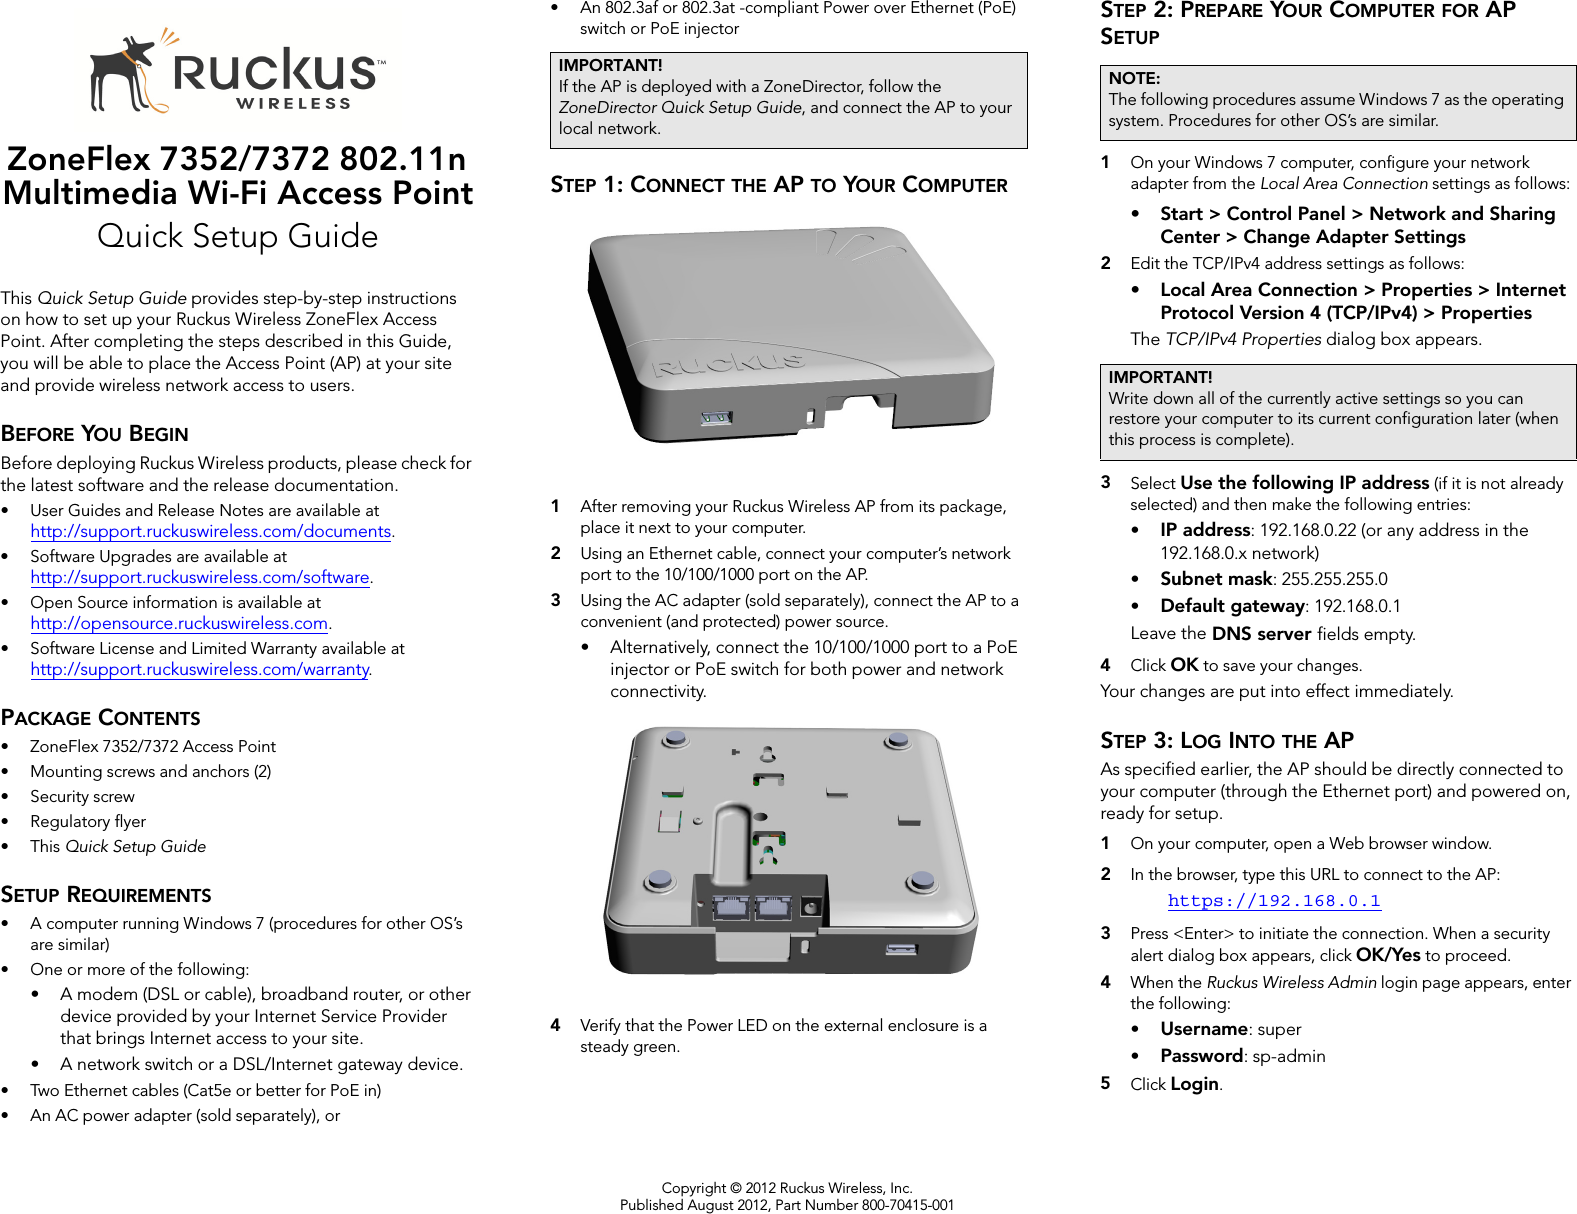 Copyright © 2012 Ruckus Wireless, Inc.Published August 2012, Part Number 800-70415-001ZoneFlex 7352/7372 802.11n Multimedia Wi-Fi Access PointQuick Setup GuideThis Quick Setup Guide provides step-by-step instructions on how to set up your Ruckus Wireless ZoneFlex Access Point. After completing the steps described in this Guide, you will be able to place the Access Point (AP) at your site and provide wireless network access to users.BEFORE YOU BEGINBefore deploying Ruckus Wireless products, please check for the latest software and the release documentation.• User Guides and Release Notes are available at http://support.ruckuswireless.com/documents.• Software Upgrades are available athttp://support.ruckuswireless.com/software.• Open Source information is available athttp://opensource.ruckuswireless.com.• Software License and Limited Warranty available at http://support.ruckuswireless.com/warranty.PACKAGE CONTENTS• ZoneFlex 7352/7372 Access Point• Mounting screws and anchors (2)• Security screw• Regulatory flyer•This Quick Setup GuideSETUP REQUIREMENTS• A computer running Windows 7 (procedures for other OS’s are similar)• One or more of the following:• A modem (DSL or cable), broadband router, or other device provided by your Internet Service Provider that brings Internet access to your site. • A network switch or a DSL/Internet gateway device.• Two Ethernet cables (Cat5e or better for PoE in)• An AC power adapter (sold separately), or• An 802.3af or 802.3at -compliant Power over Ethernet (PoE) switch or PoE injectorSTEP 1: CONNECT THE AP TO YOUR COMPUTER1After removing your Ruckus Wireless AP from its package, place it next to your computer.2Using an Ethernet cable, connect your computer’s network port to the 10/100/1000 port on the AP. 3Using the AC adapter (sold separately), connect the AP to a convenient (and protected) power source. • Alternatively, connect the 10/100/1000 port to a PoE injector or PoE switch for both power and network connectivity.4Verify that the Power LED on the external enclosure is a steady green. STEP 2: PREPARE YOUR COMPUTER FOR AP SETUP1On your Windows 7 computer, configure your network adapter from the Local Area Connection settings as follows:• Start &gt; Control Panel &gt; Network and Sharing Center &gt; Change Adapter Settings2Edit the TCP/IPv4 address settings as follows: • Local Area Connection &gt; Properties &gt; Internet Protocol Version 4 (TCP/IPv4) &gt; PropertiesThe TCP/IPv4 Properties dialog box appears.3Select Use the following IP address (if it is not already selected) and then make the following entries:•IP address: 192.168.0.22 (or any address in the 192.168.0.x network)•Subnet mask: 255.255.255.0•Default gateway: 192.168.0.1Leave the DNS server fields empty.4Click OK to save your changes.Your changes are put into effect immediately. STEP 3: LOG INTO THE APAs specified earlier, the AP should be directly connected to your computer (through the Ethernet port) and powered on, ready for setup.1On your computer, open a Web browser window.2In the browser, type this URL to connect to the AP: https://192.168.0.13Press &lt;Enter&gt; to initiate the connection. When a security alert dialog box appears, click OK/Yes to proceed.4When the Ruckus Wireless Admin login page appears, enter the following: •Username: super•Password: sp-admin5Click Login.IMPORTANT!If the AP is deployed with a ZoneDirector, follow the ZoneDirector Quick Setup Guide, and connect the AP to your local network.NOTE:The following procedures assume Windows 7 as the operating system. Procedures for other OS’s are similar.IMPORTANT!Write down all of the currently active settings so you can restore your computer to its current configuration later (when this process is complete).